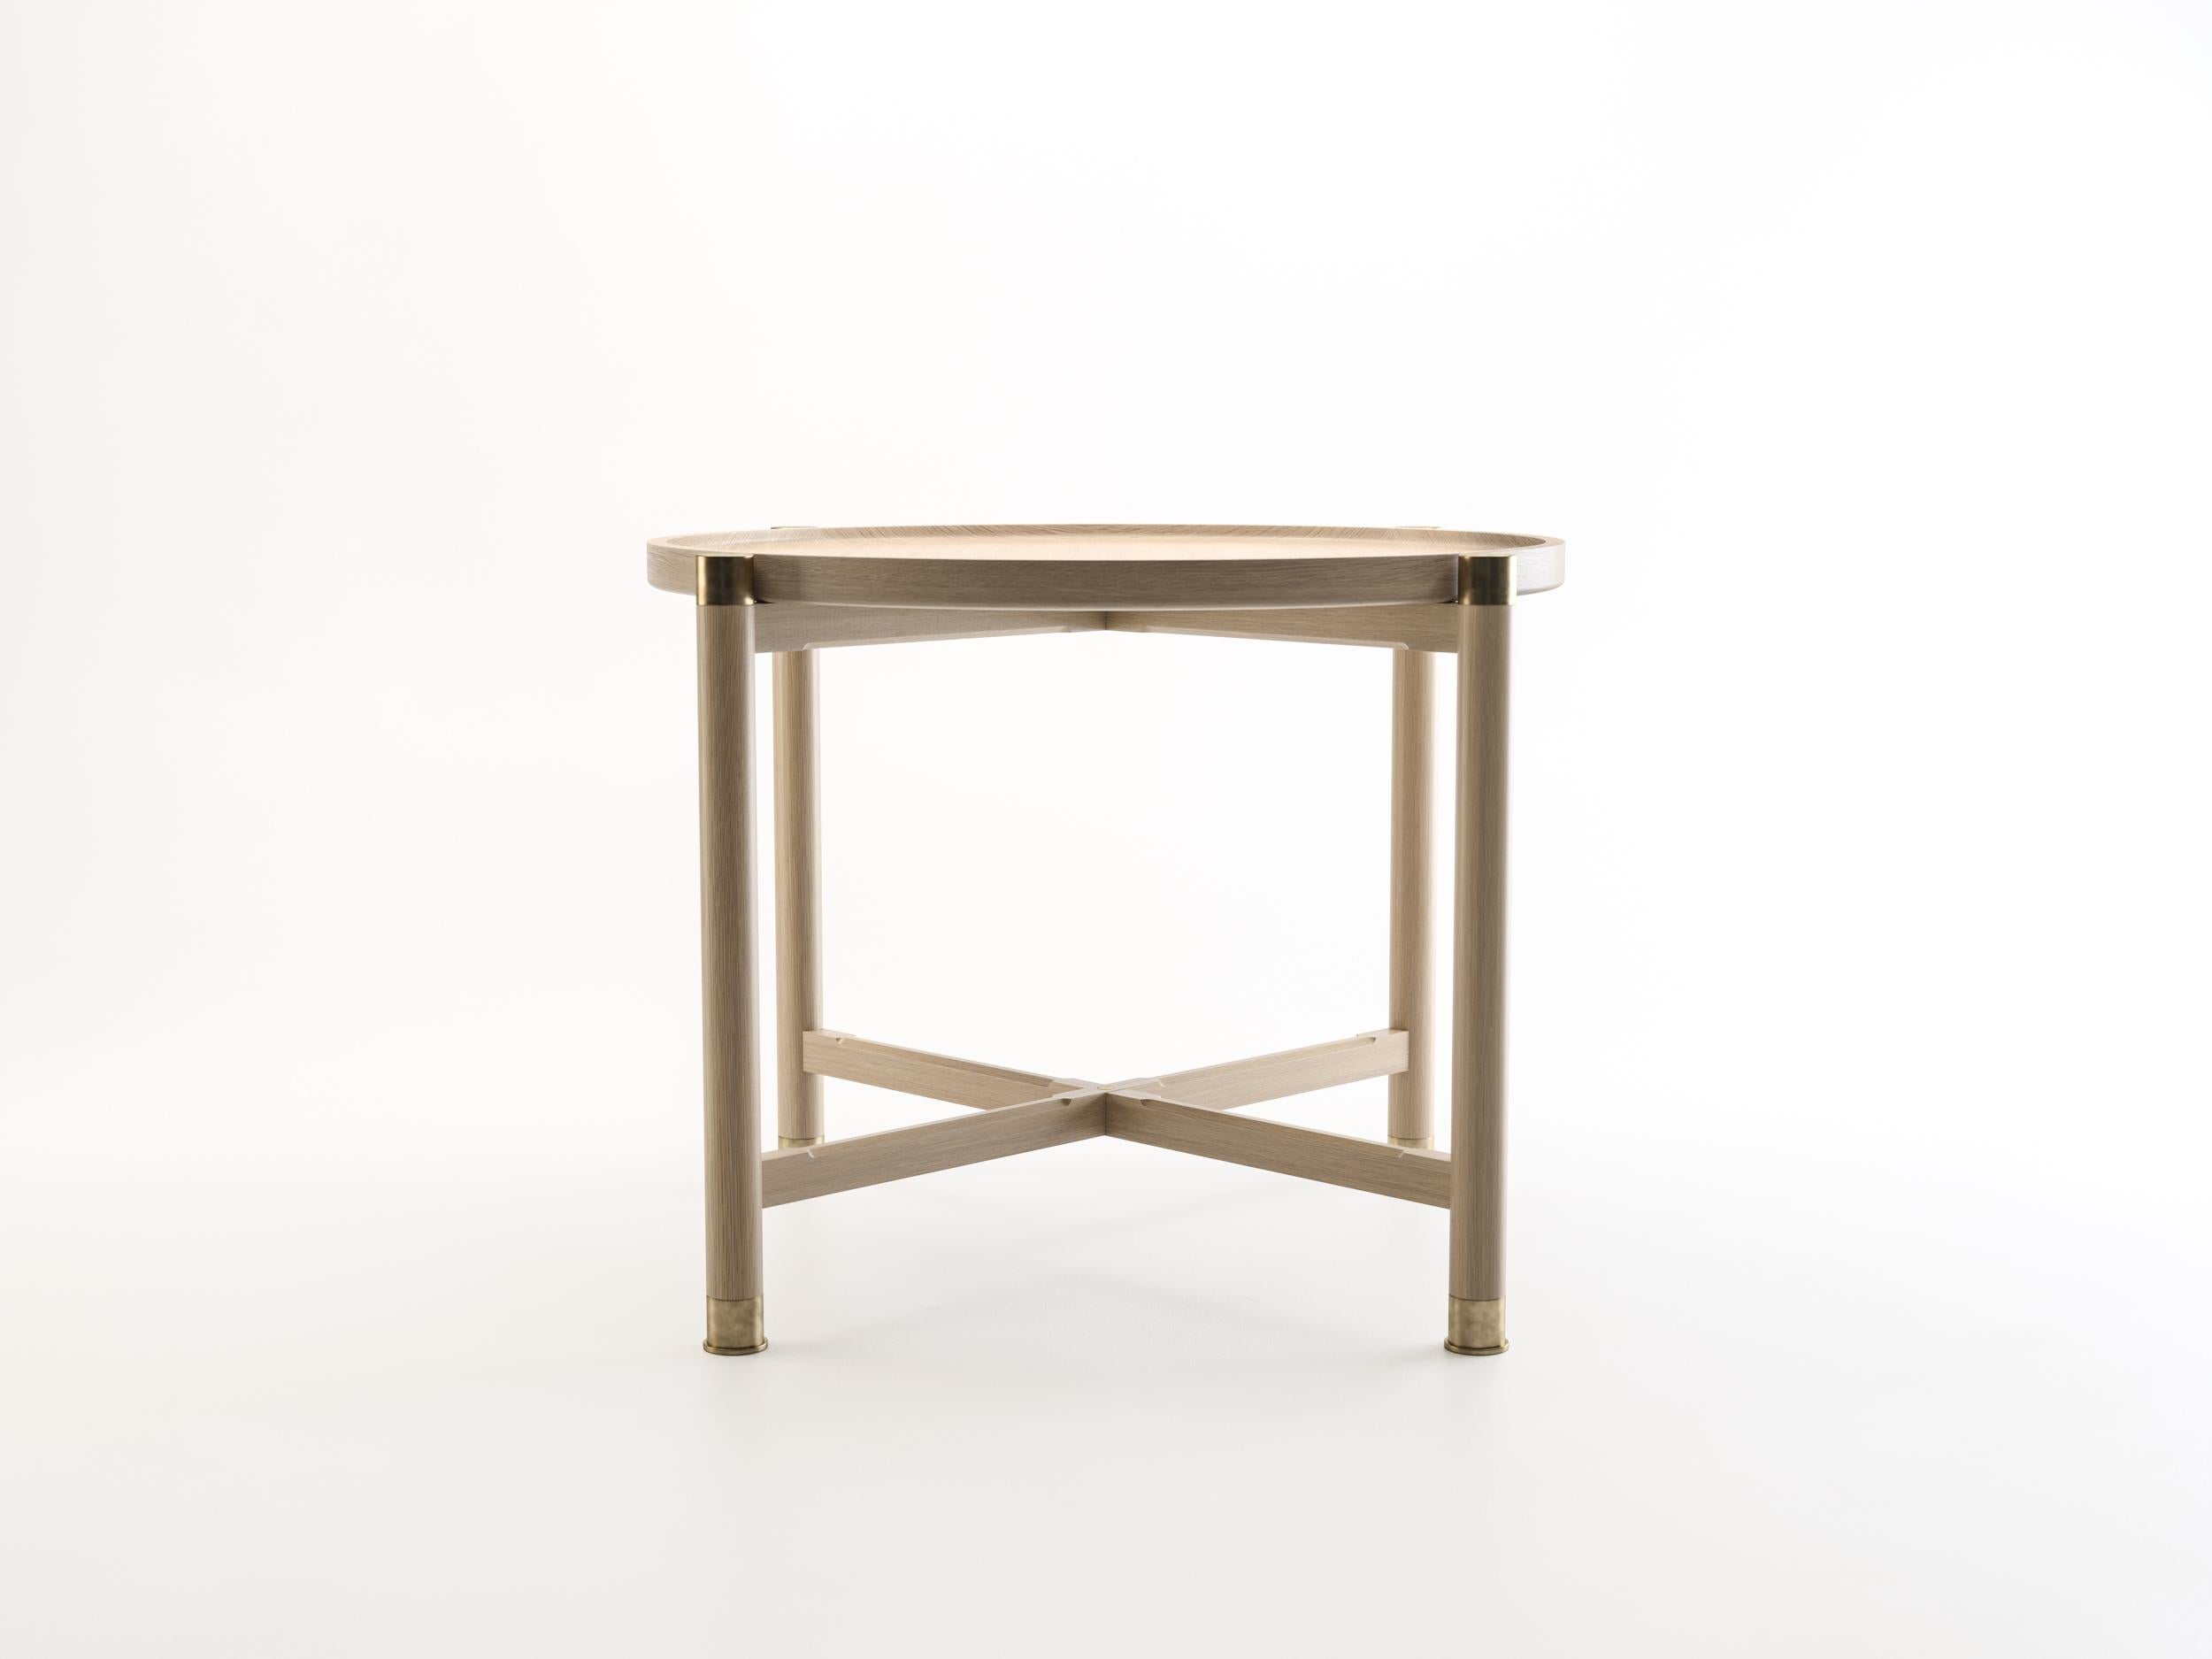 The Otto side table is a generously proportioned table with a simple, well-articulated form.
Available in oak or walnut, it features a round coupe top, substantial antique brass fittings, and sleek chamfered stretchers. The epitome of understated